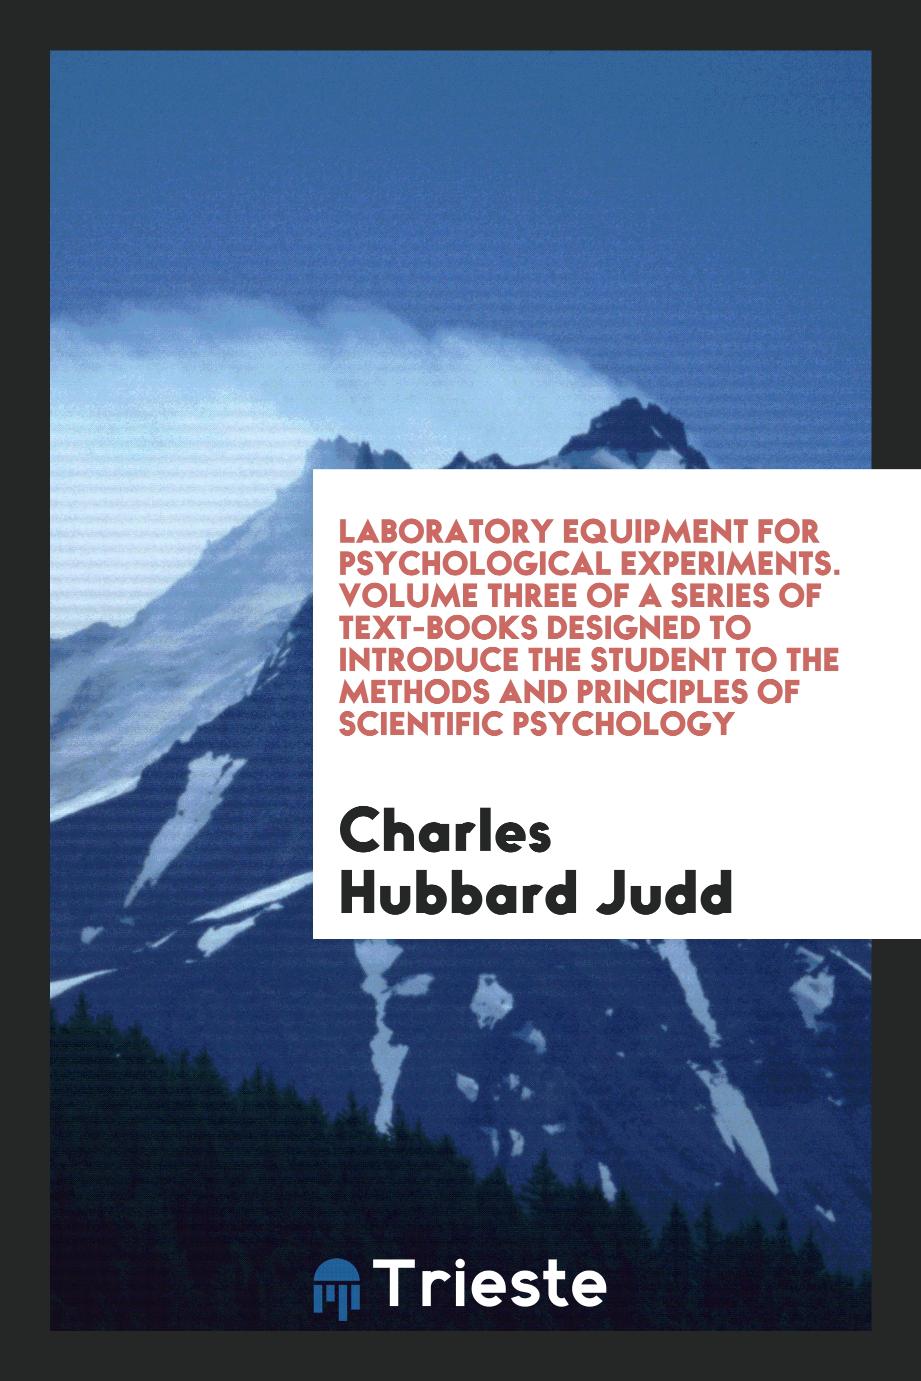 Laboratory Equipment for Psychological Experiments. Volume Three of a Series of Text-Books Designed to Introduce the Student to the Methods and Principles of Scientific Psychology